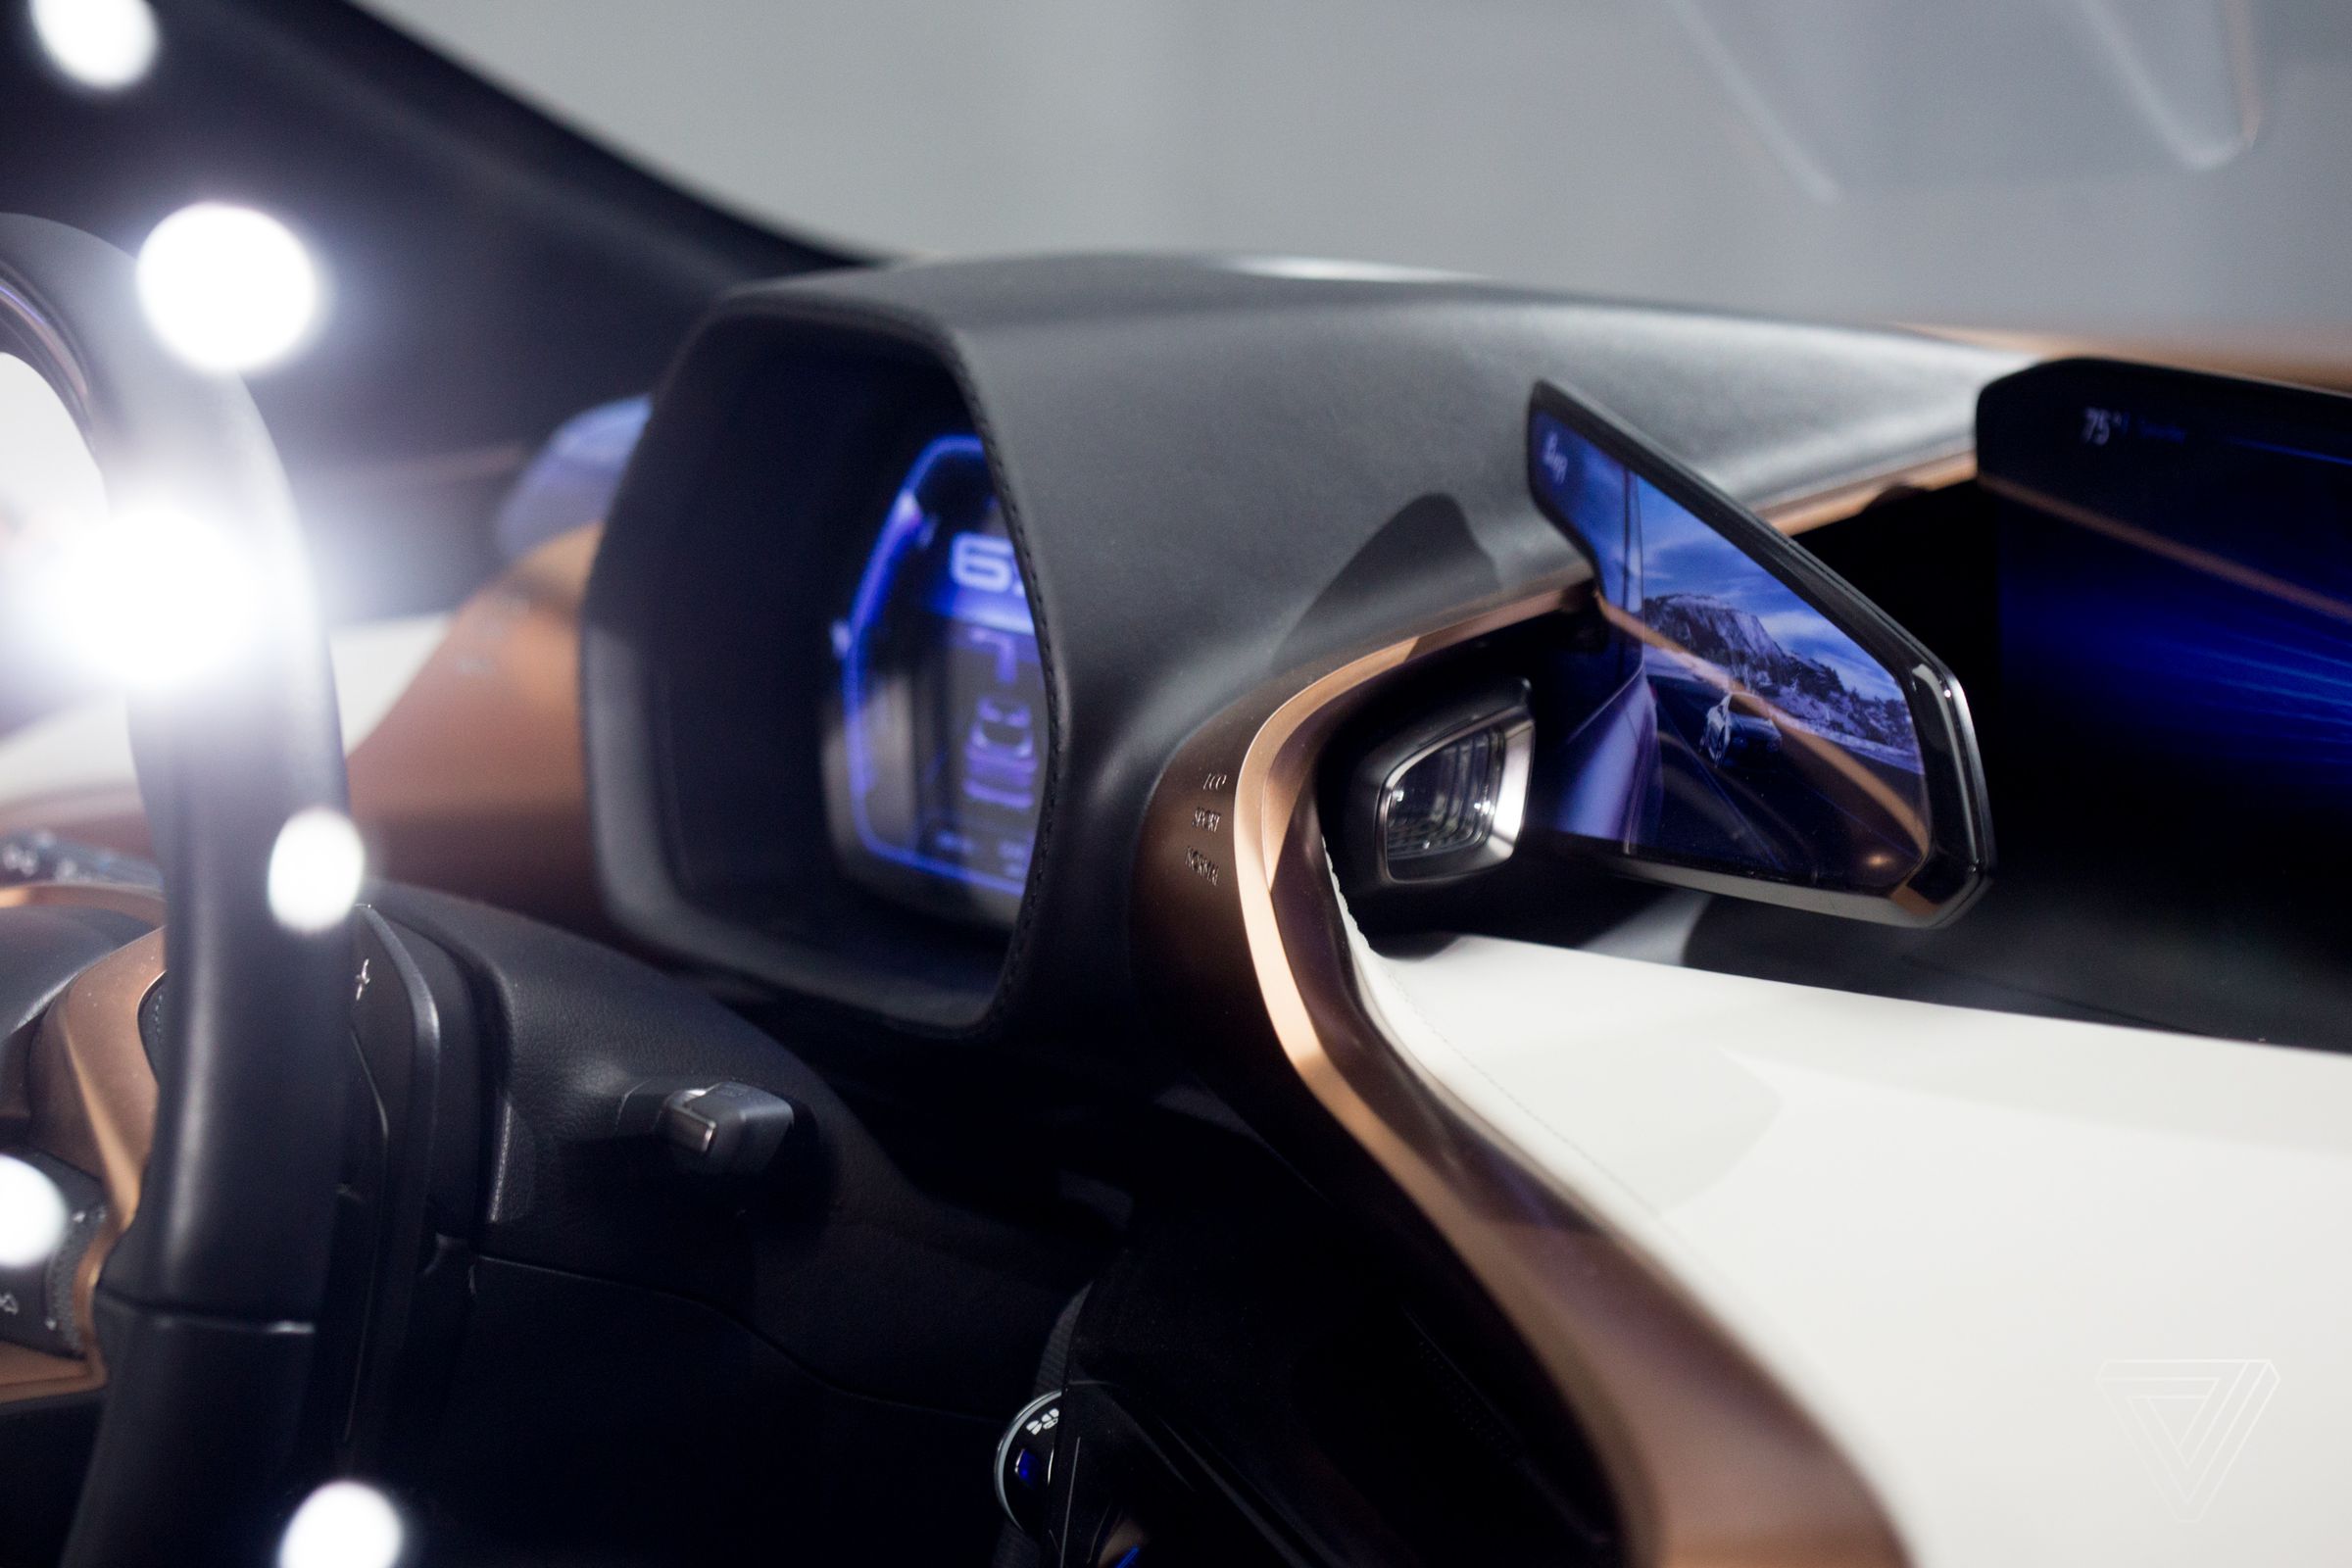 The Lexus LF-1’s interior features a handful of triangular screens. See more photos here.